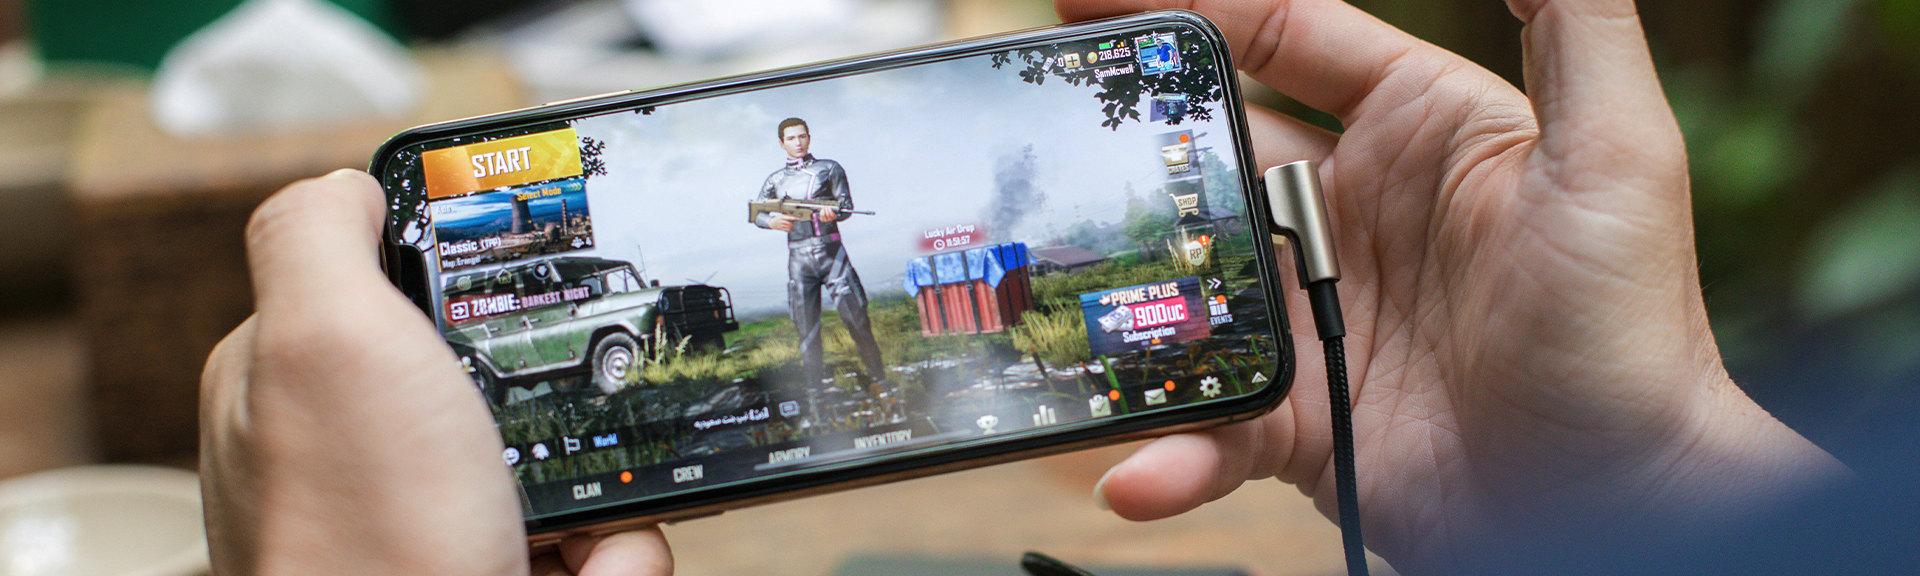 Optimizing Mobile Gaming Experience With Advanced Smartphone Capabilities